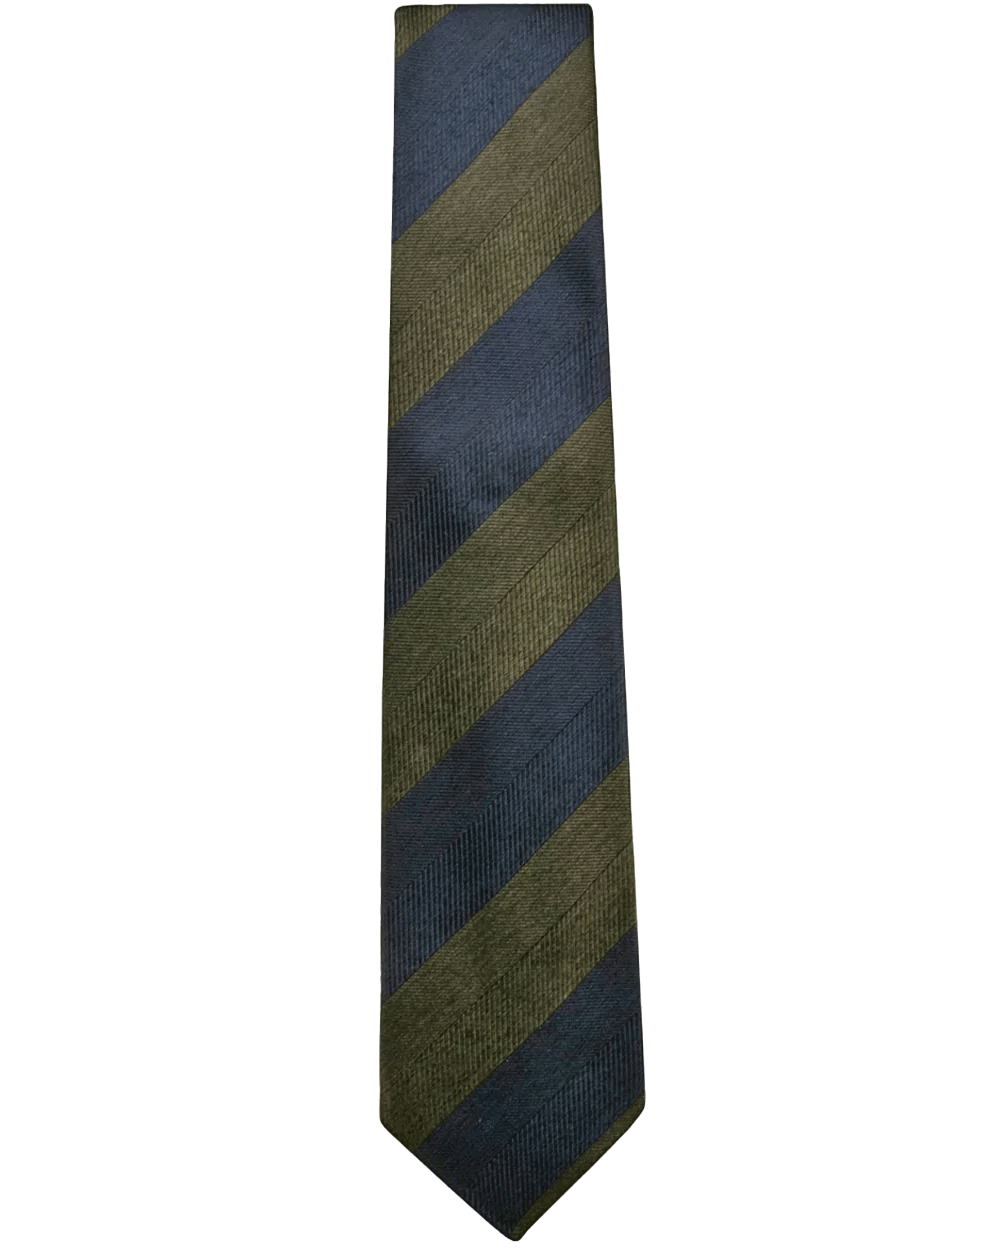 Navy and Green Stripes Tie